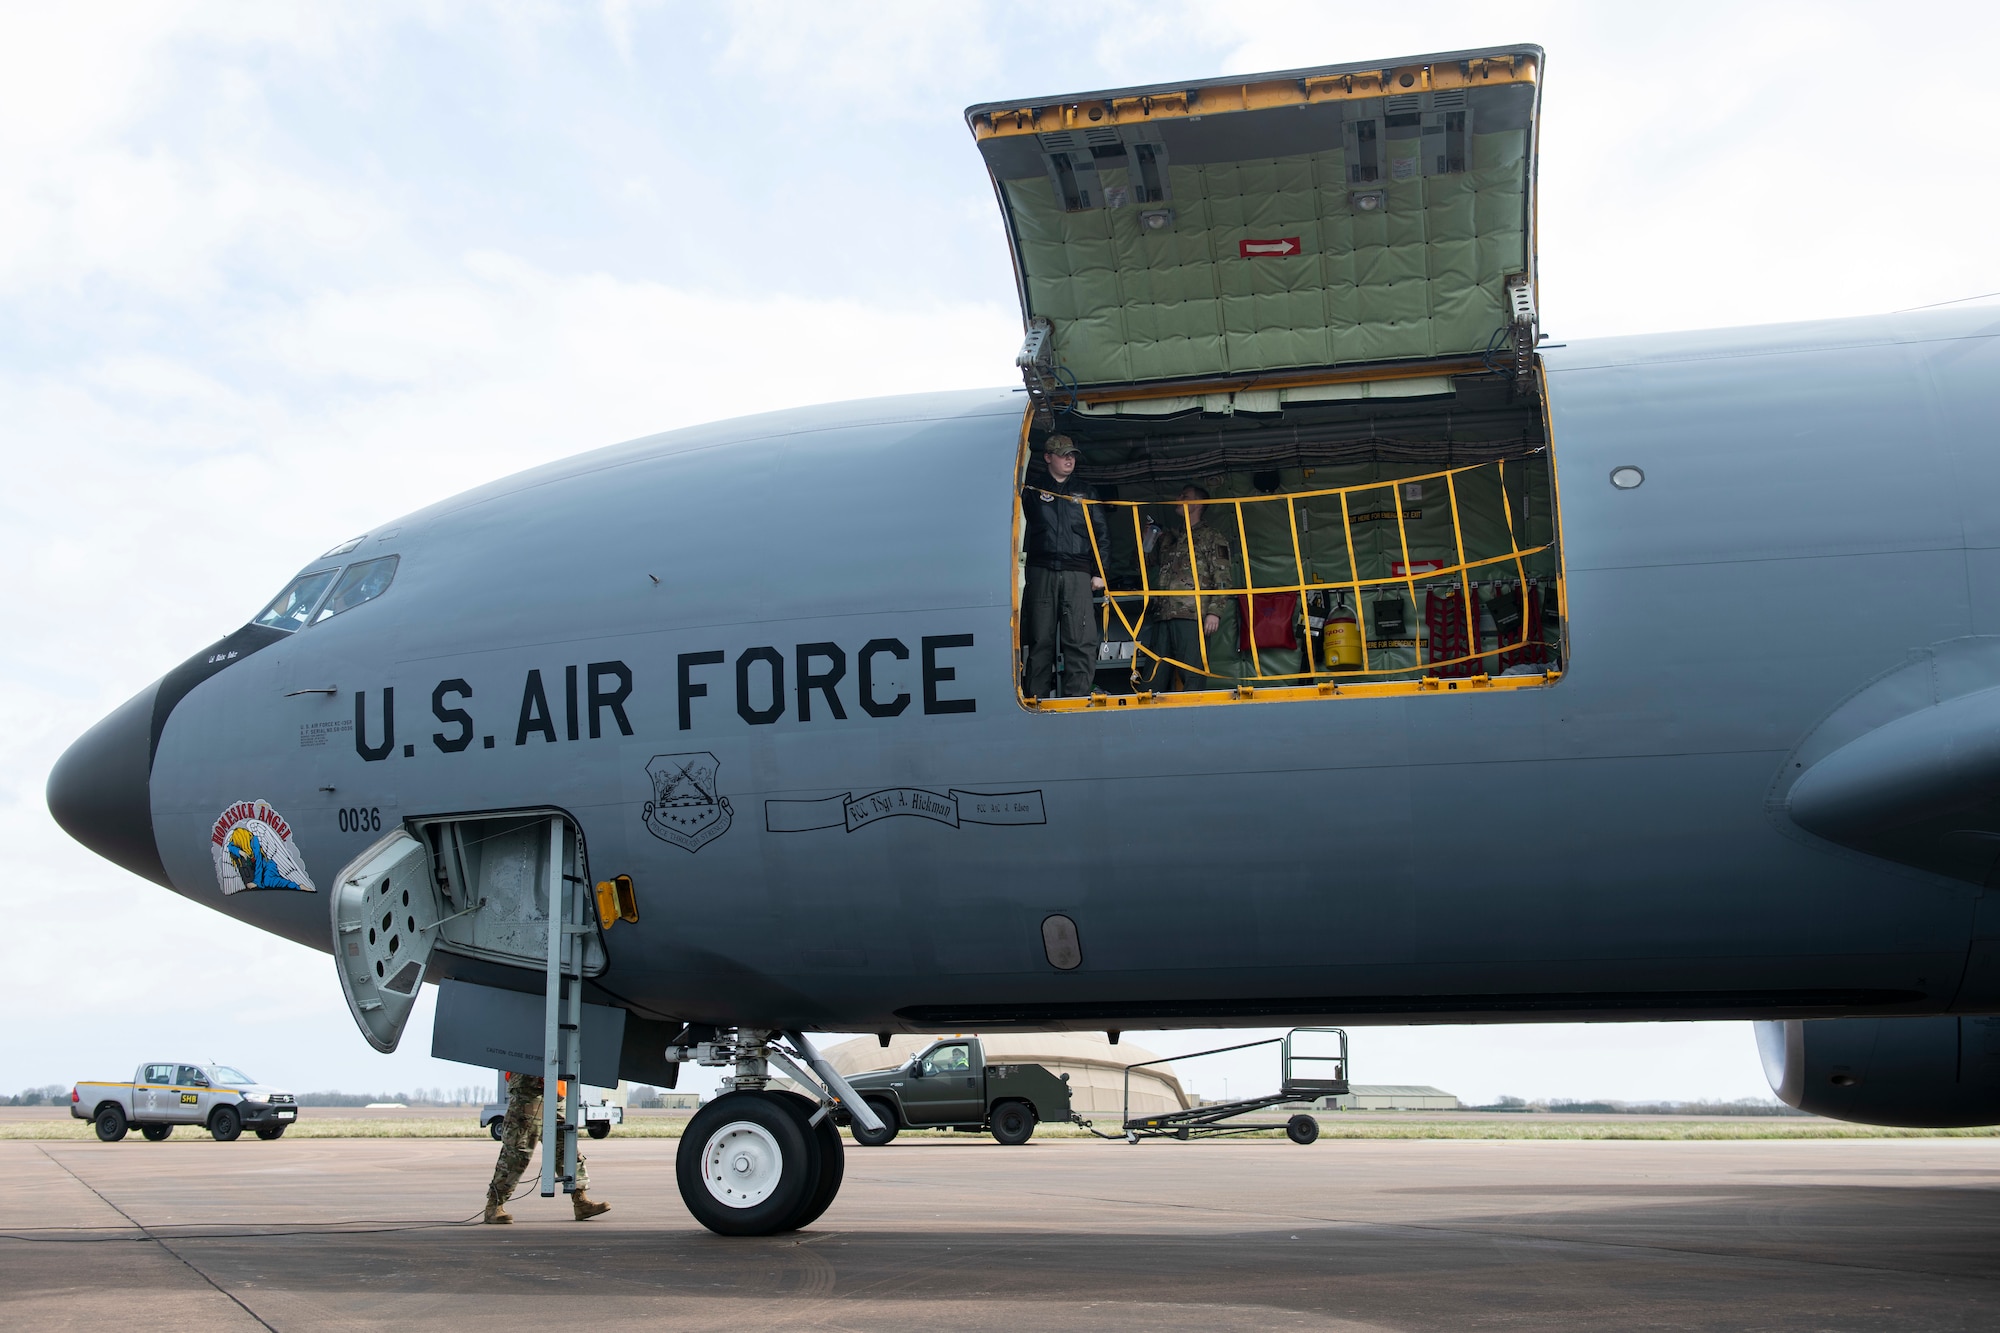 A U.S. Air Force KC-135 Stratotanker aircraft assigned to the 100th Air Refueling Wing, lands at Royal Air Force Fairford, England, during the Baltic Trident Exercise, March 15, 2021. U.S. forces in Europe continuously strengthen our alliances and partnerships to create a networked security architecture capable of deterring aggression and maintaining stability. (U.S. Air Force photo by Senior Airman Jennifer Zima)